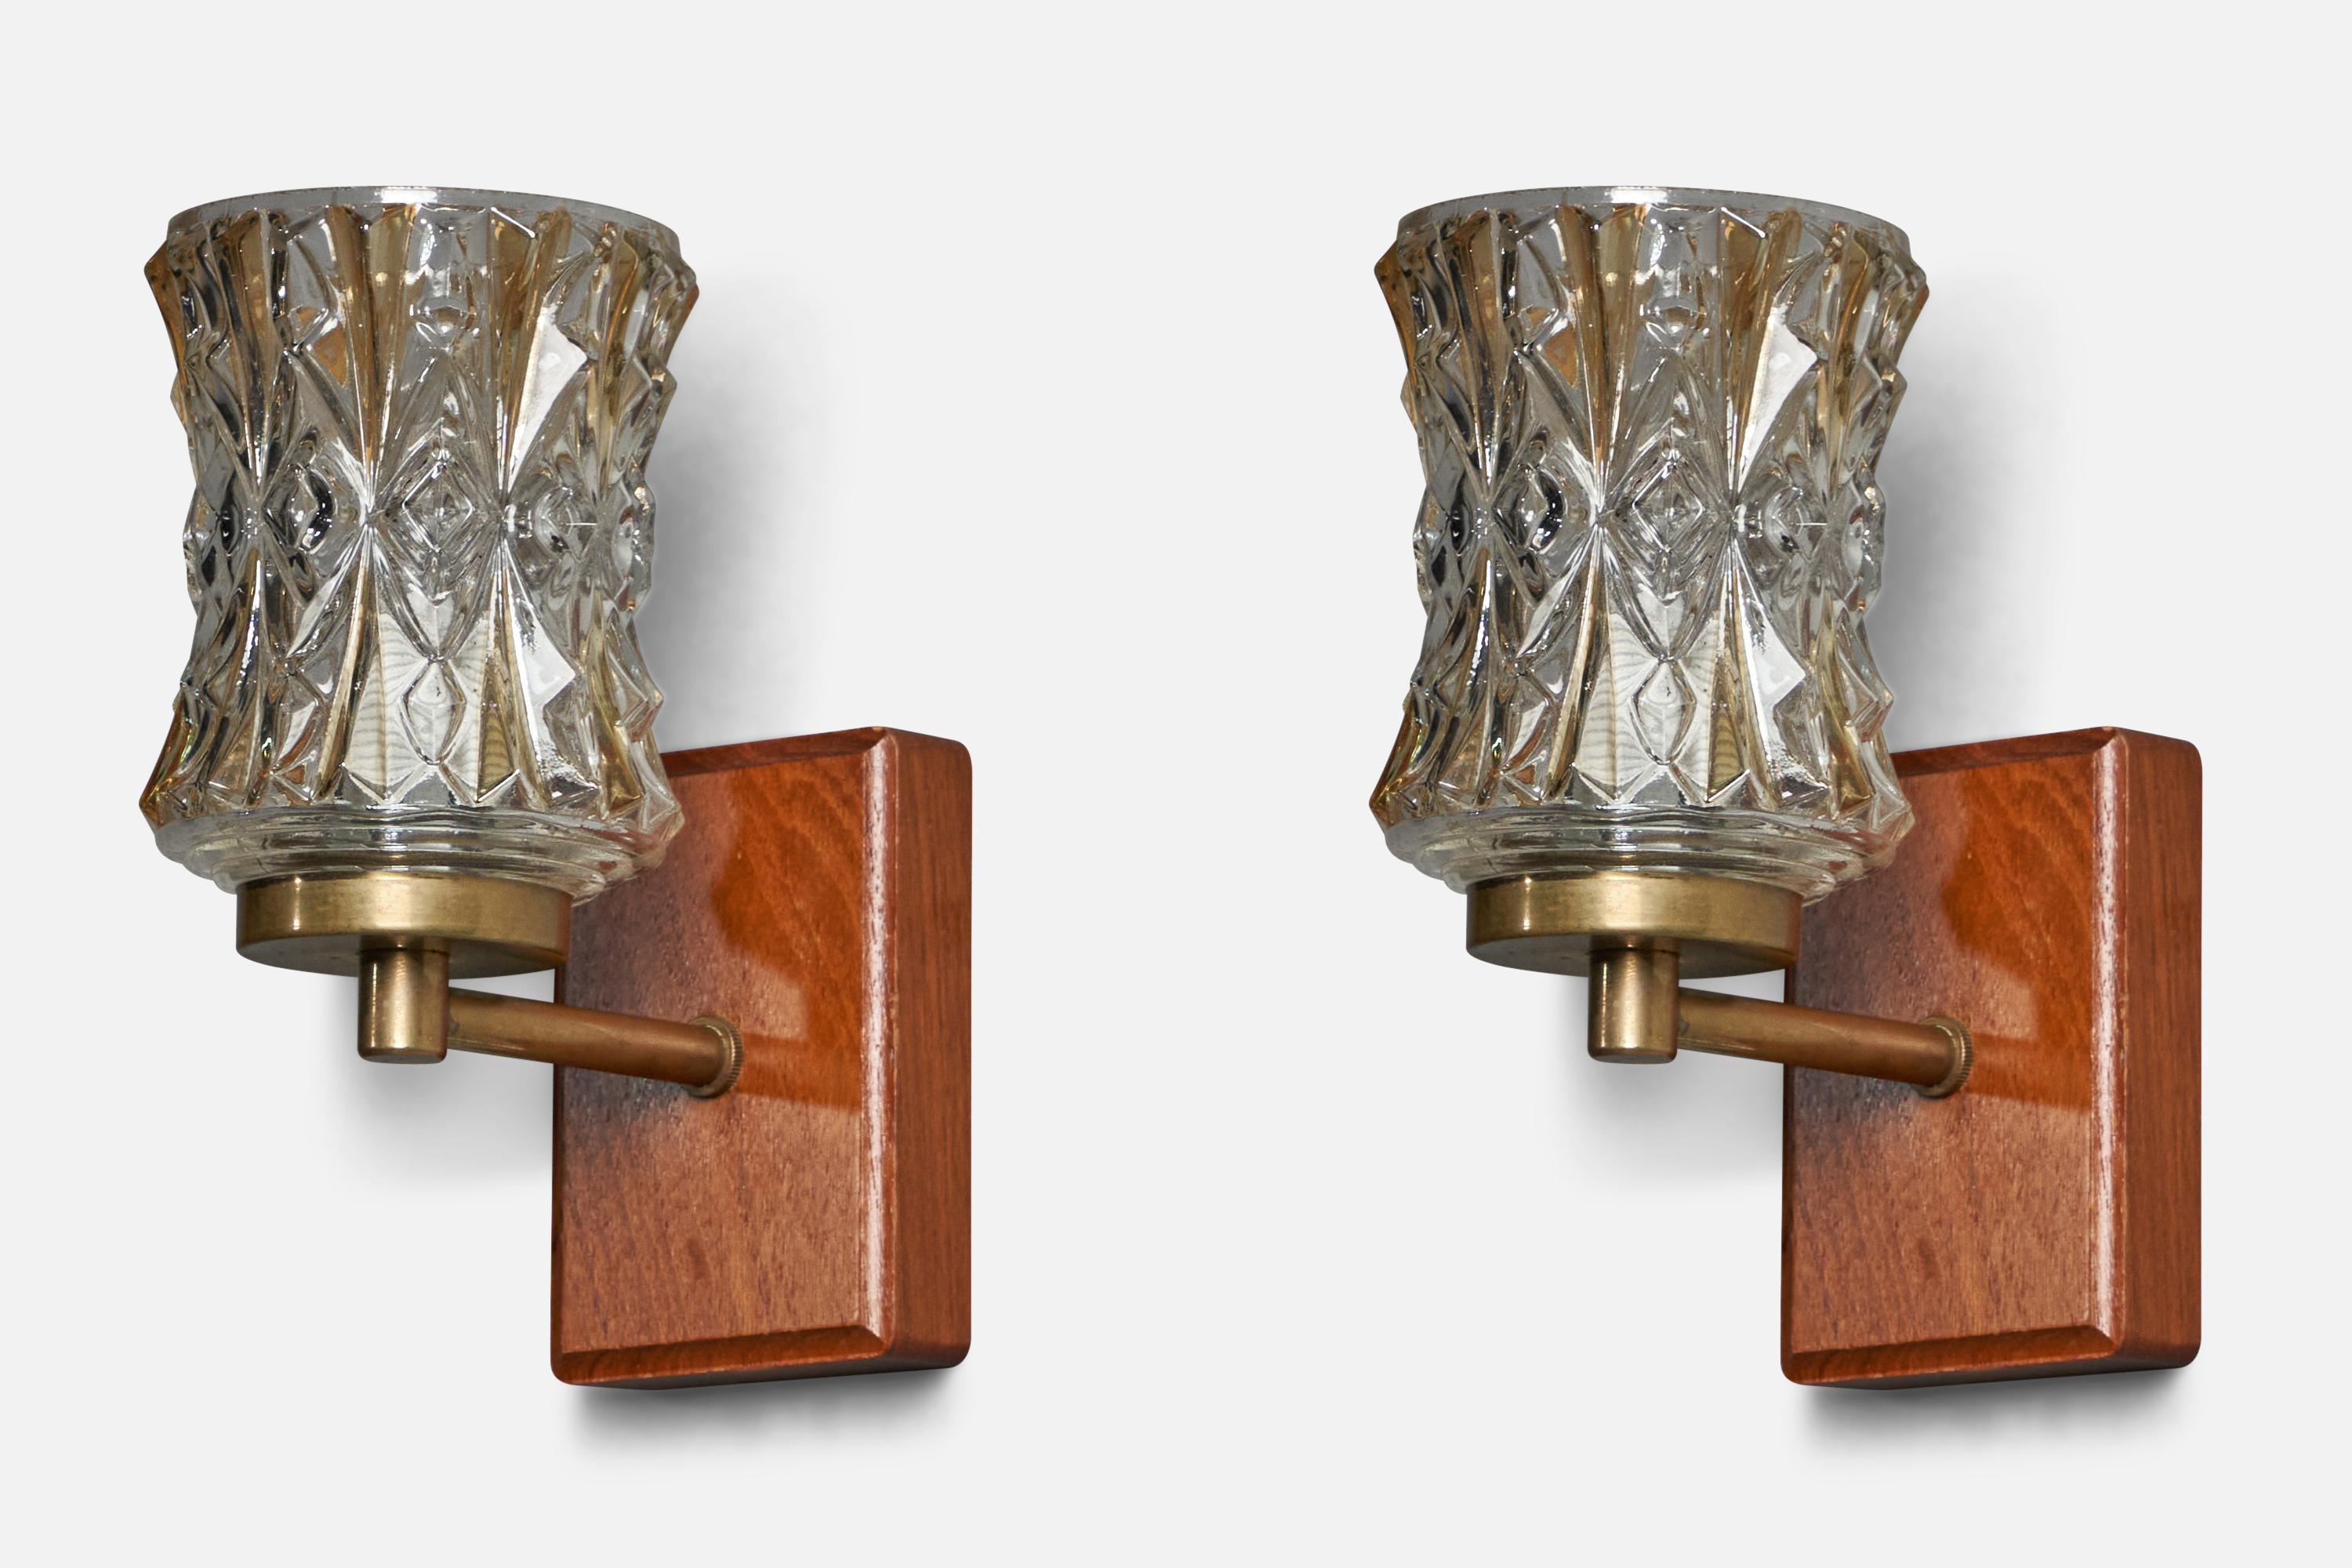 A pair of brass, glass and teak wall lights designed and produced in Sweden, c. 1950s.

Overall Dimensions (inches): 6.25” H x 2.85” W x 5.5” D
Back Plate Dimensions (inches): 3.9” H x 2.85” W x 0.9” D
Bulb Specifications: E-14 Bulb
Number of